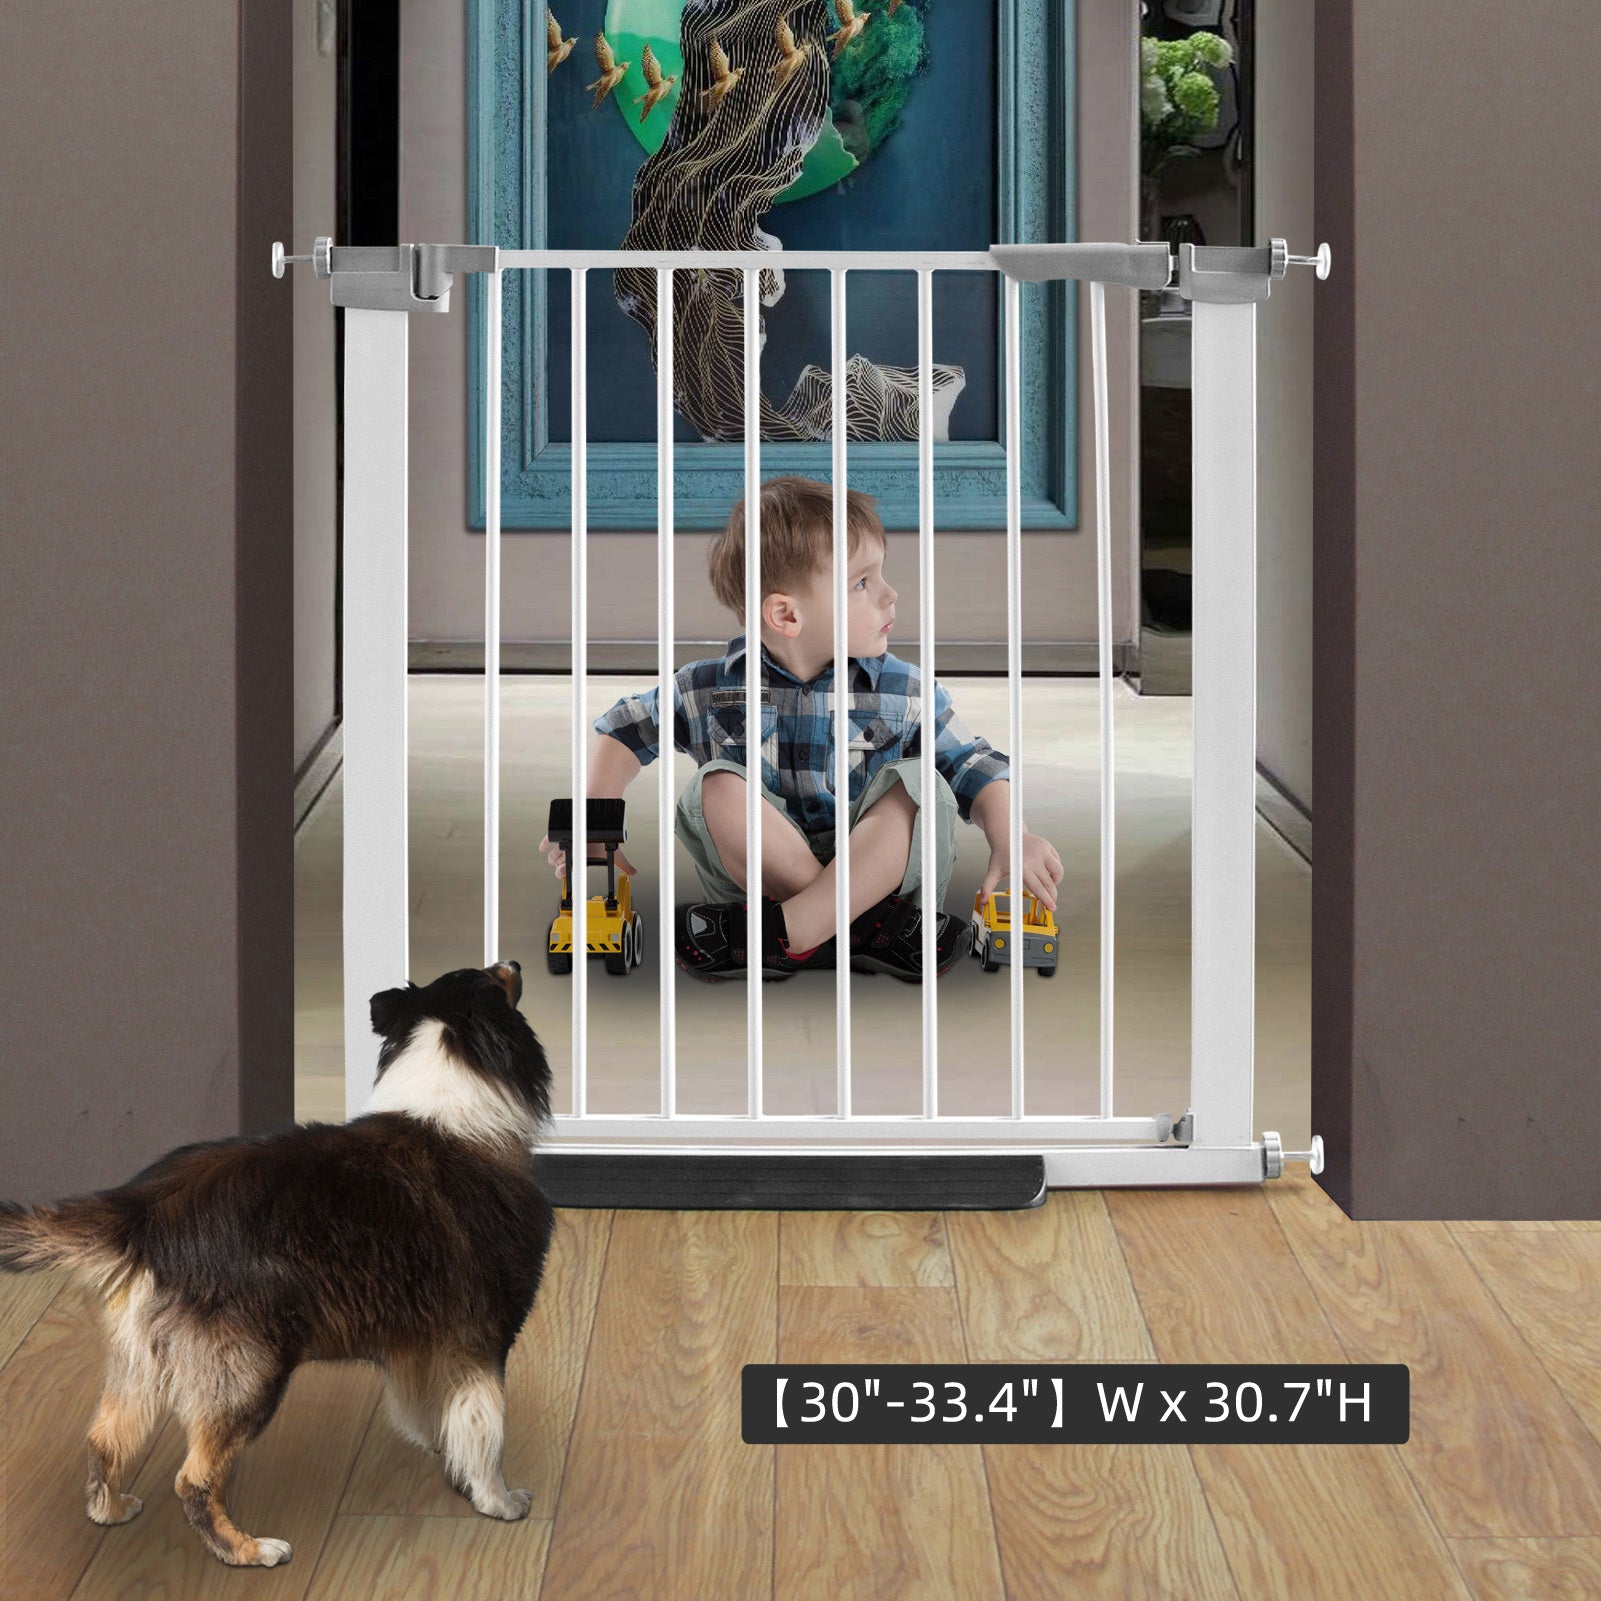 ZJSF Auto Close Retractable Dog Gate for The House, Easy Install Pressure Mounted Pet Gates for Doorways, Walk Thru Baby Gate,Safety Gate for Dog